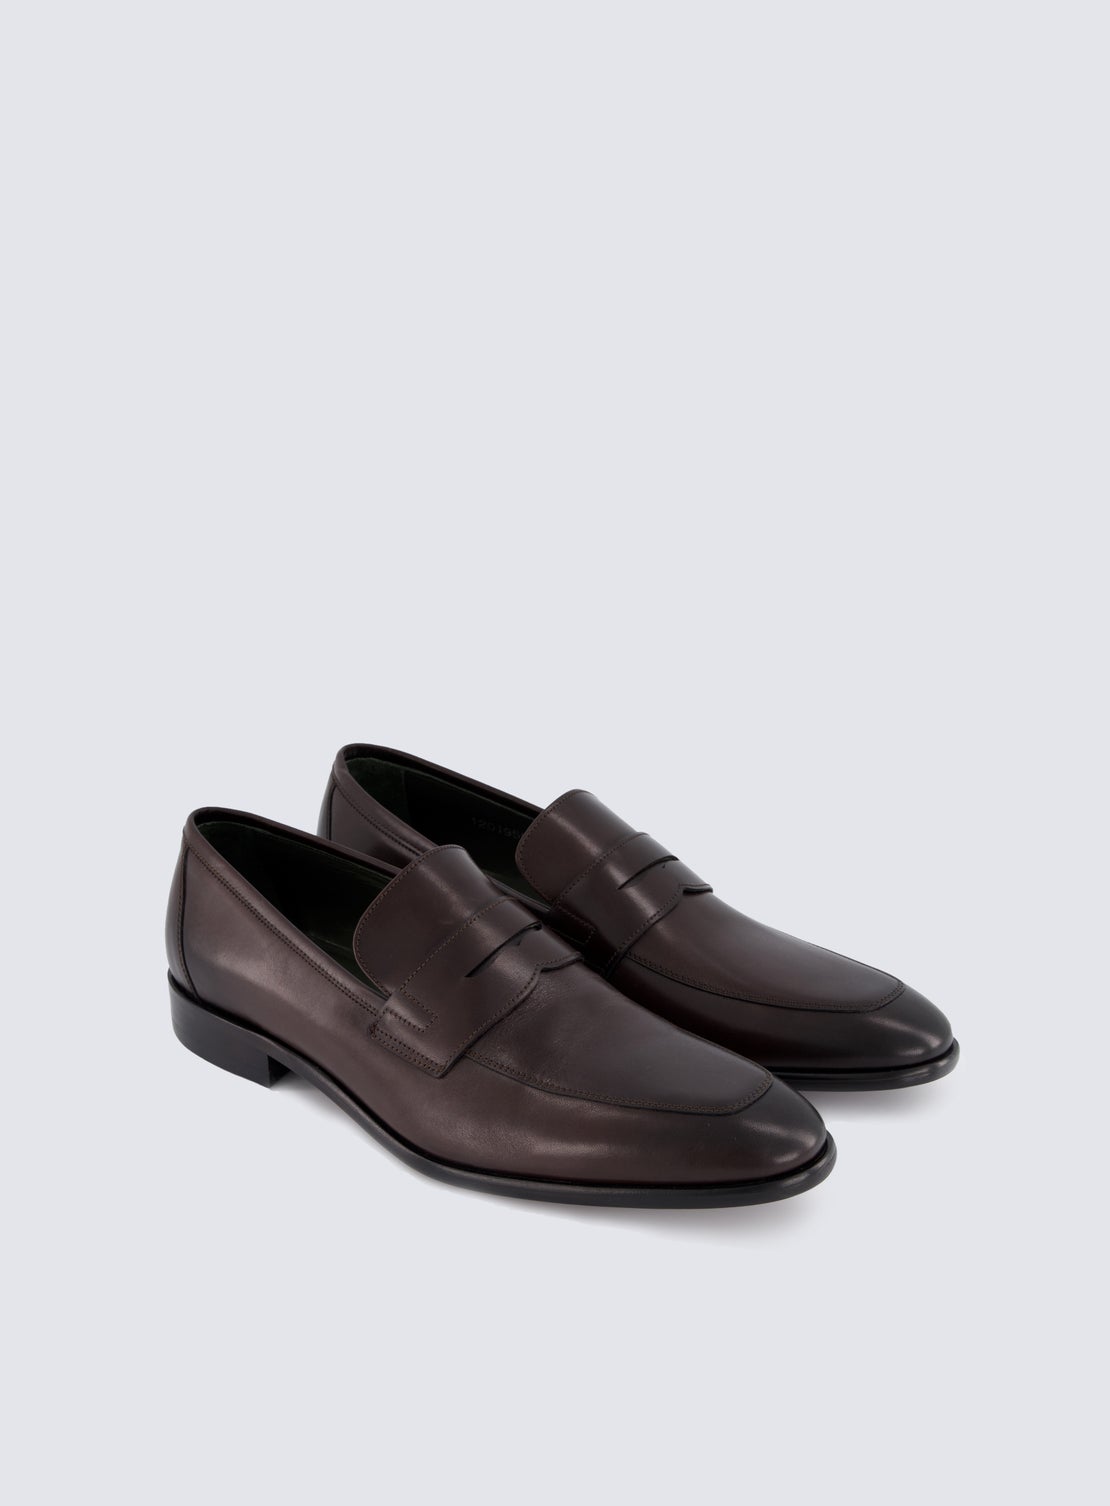 Weller Chocolate  Loafer